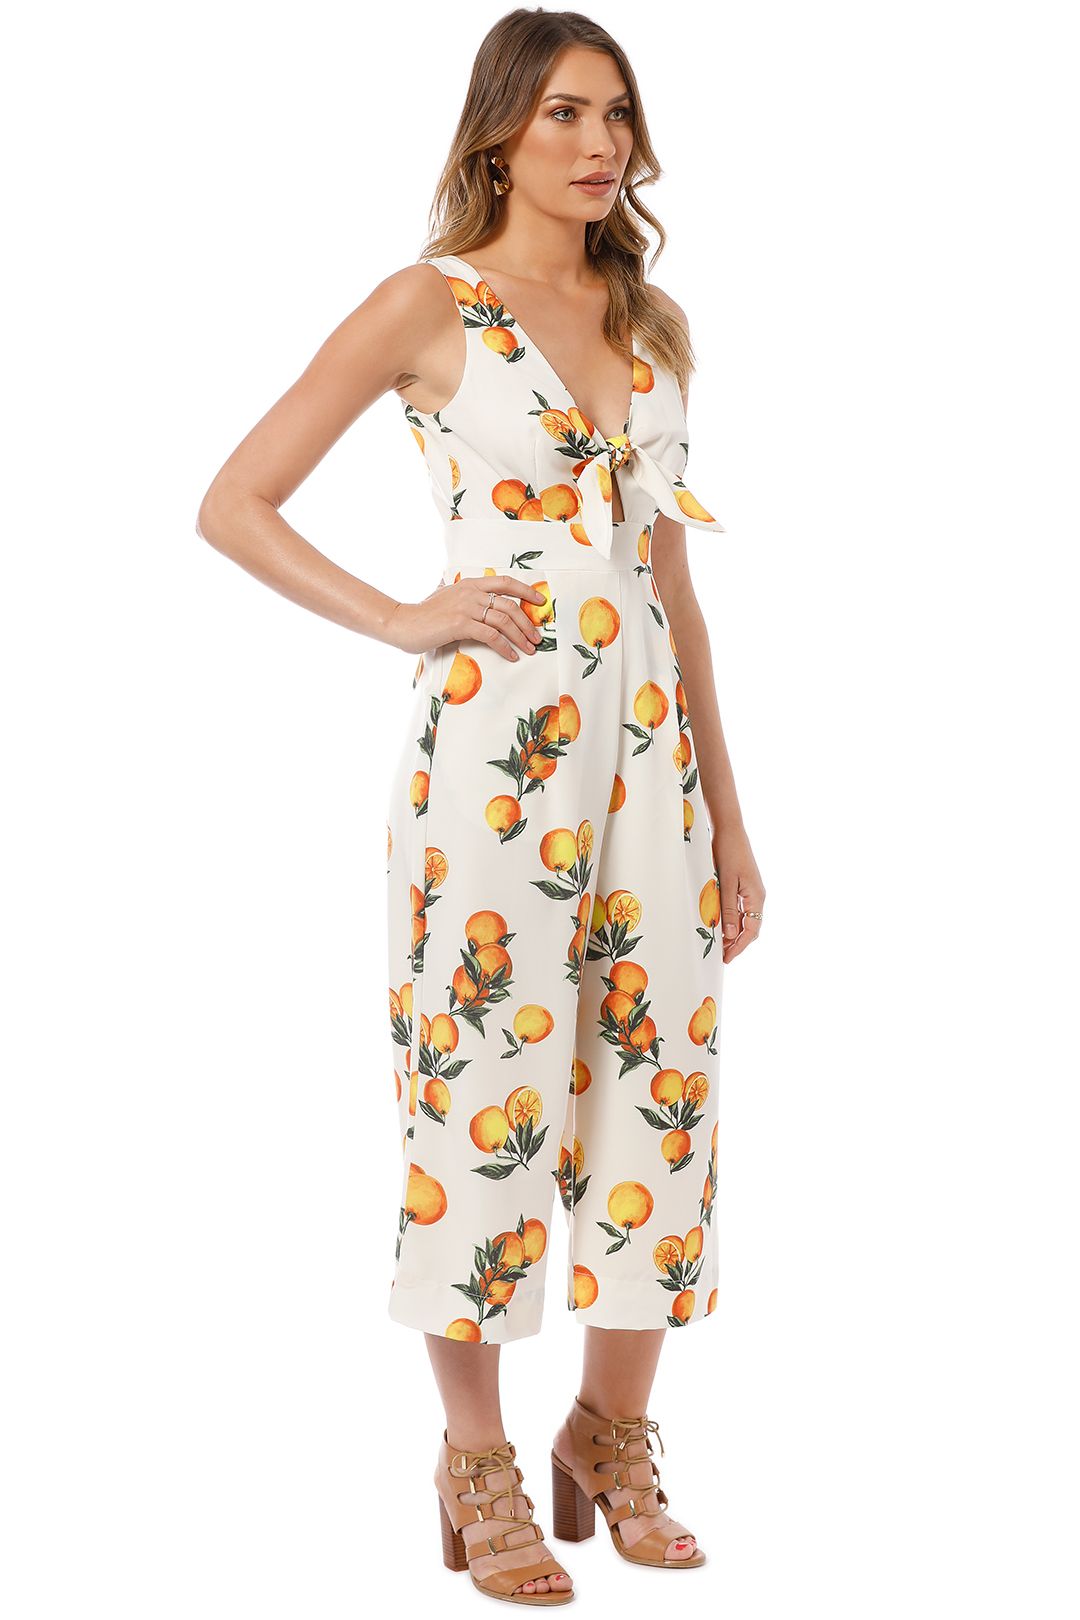 Sheike - Clementine Jumpsuit - Print - Side